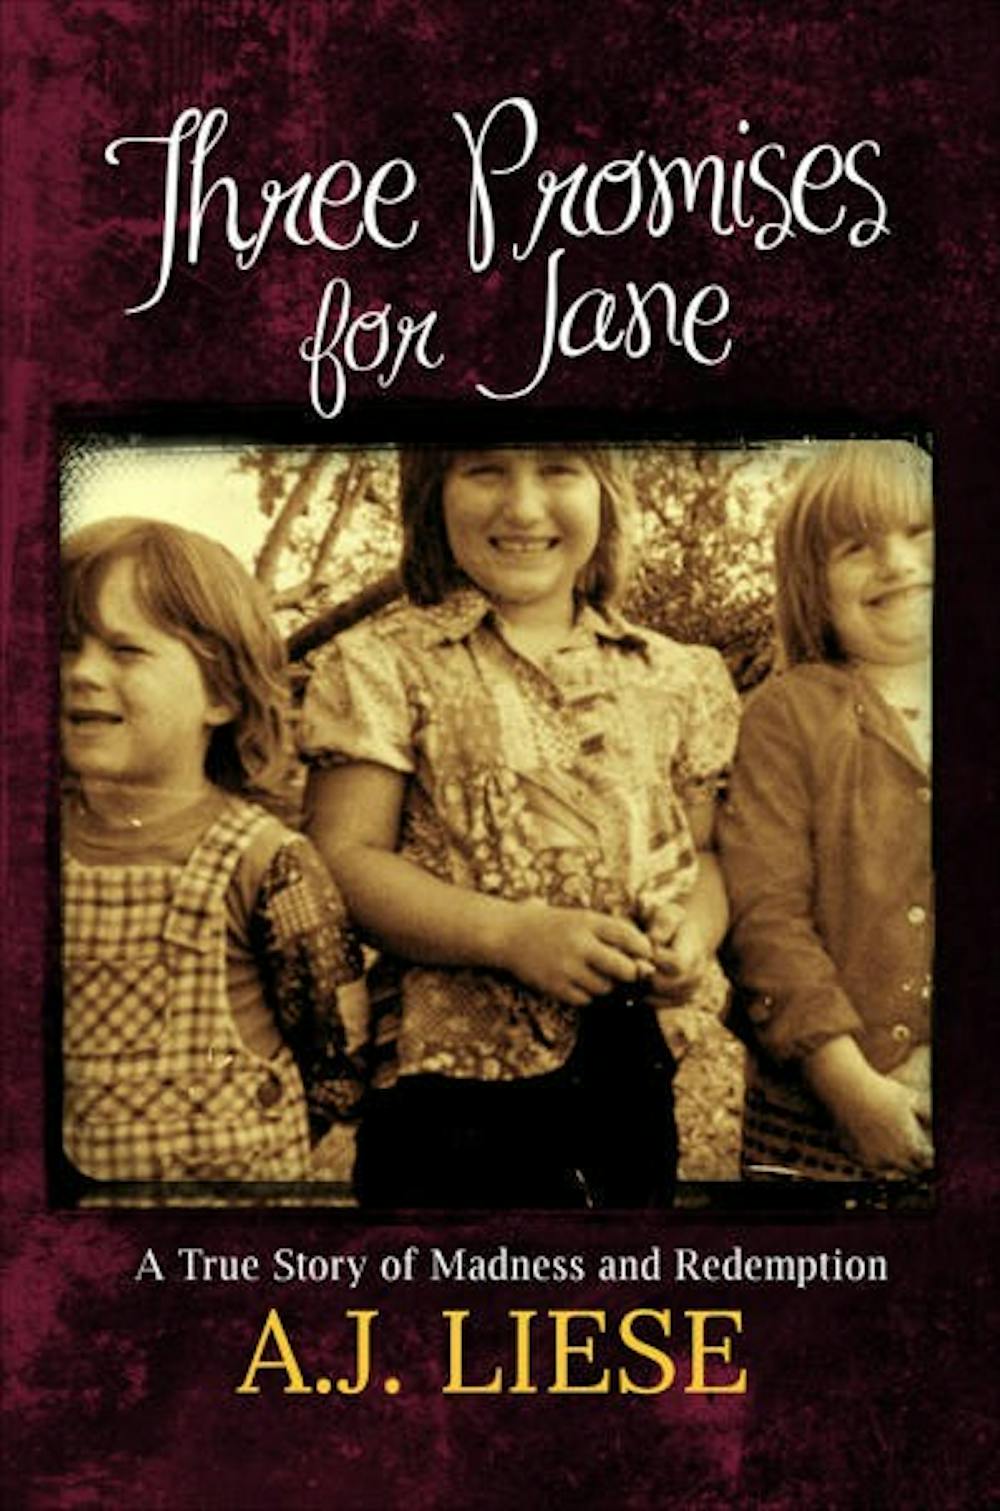 Cover of "Three Promises for Jane: A True Story of Madness and Redemption" by Aerial Liese.  Photo courtesy of Aerial Liese jwigelsworth@abqjournal.com Tue Aug 25 15:27:06 -0600 2015 1440538025 FILENAME: 197988.jpg